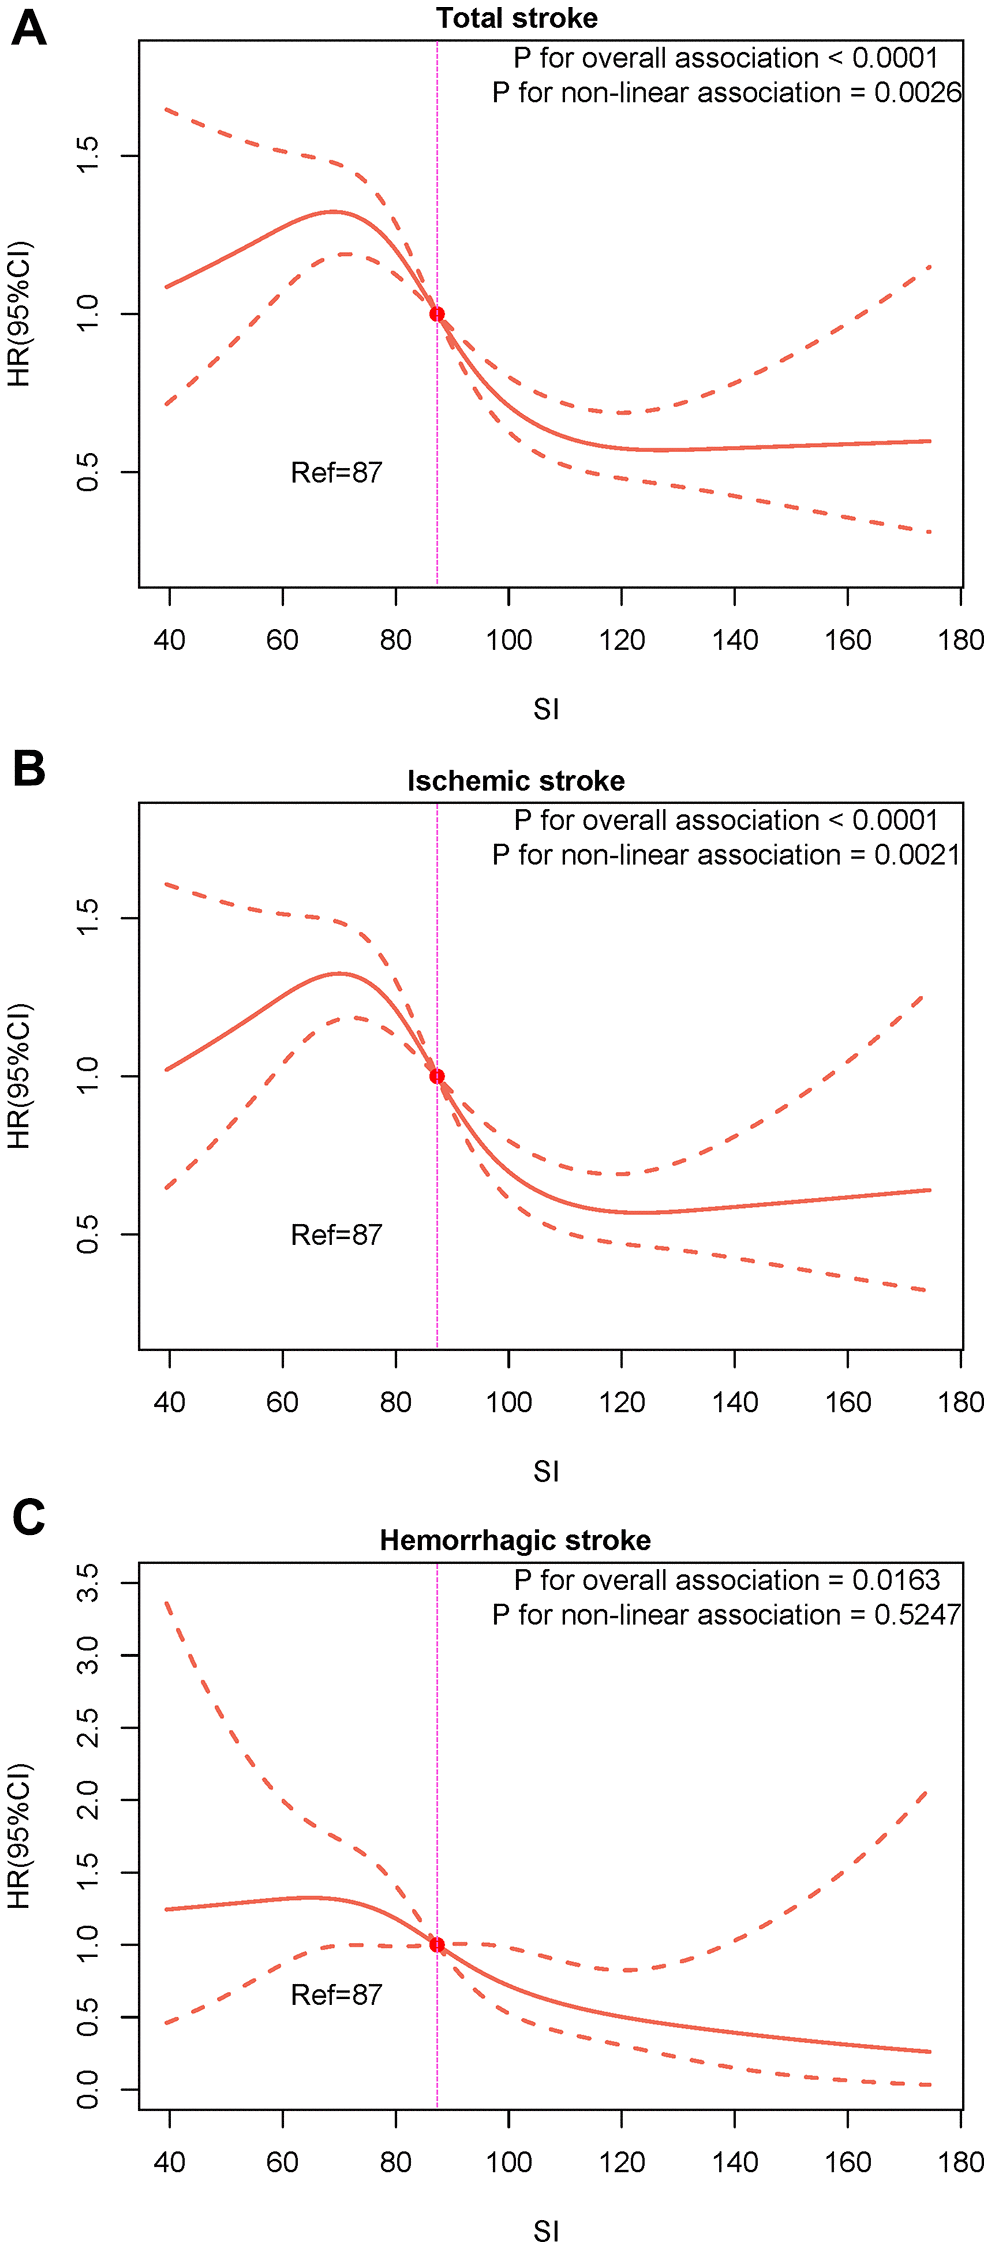 Restricted cubic splines for the associations of SI with the risk of total stroke and its subtypes. (A) Total stroke; (B) Ischemic stroke; (C) Hemorrhagic stroke.